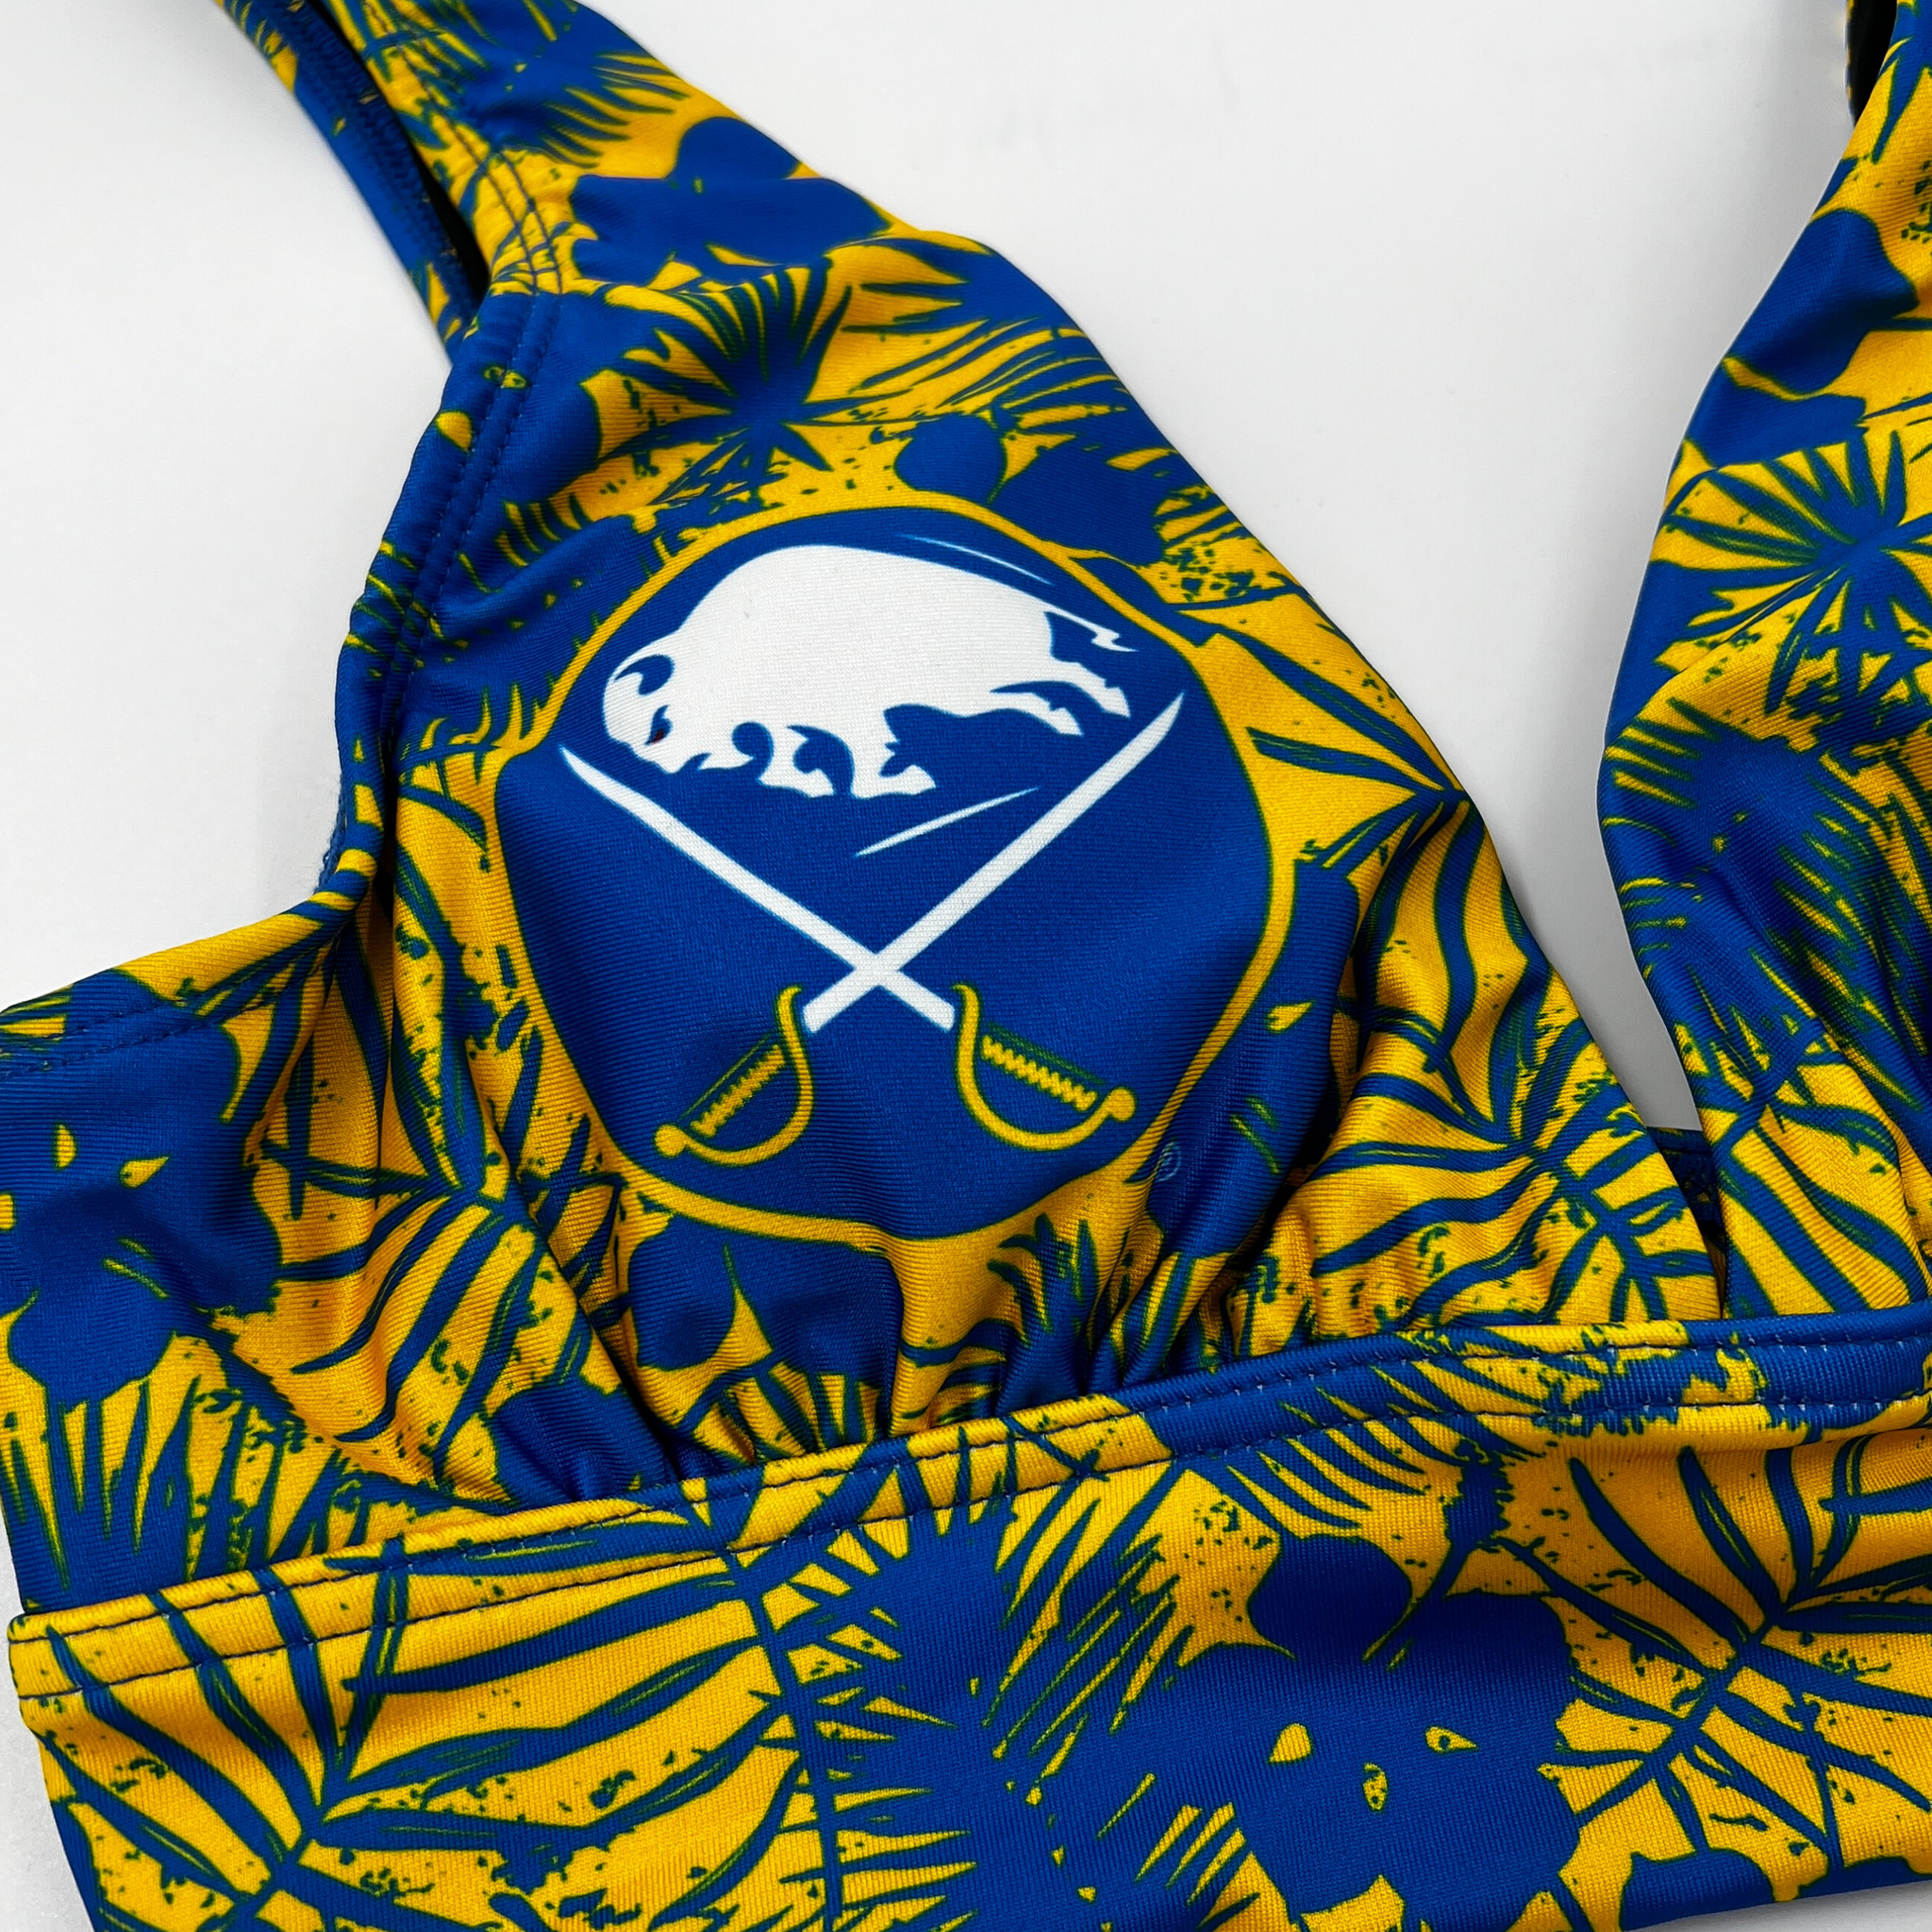 Buffalo Sabres - Our new royal blue jerseys are available for preorder! 🤩  Call the Sabres Store to get yours: 716-855-4140